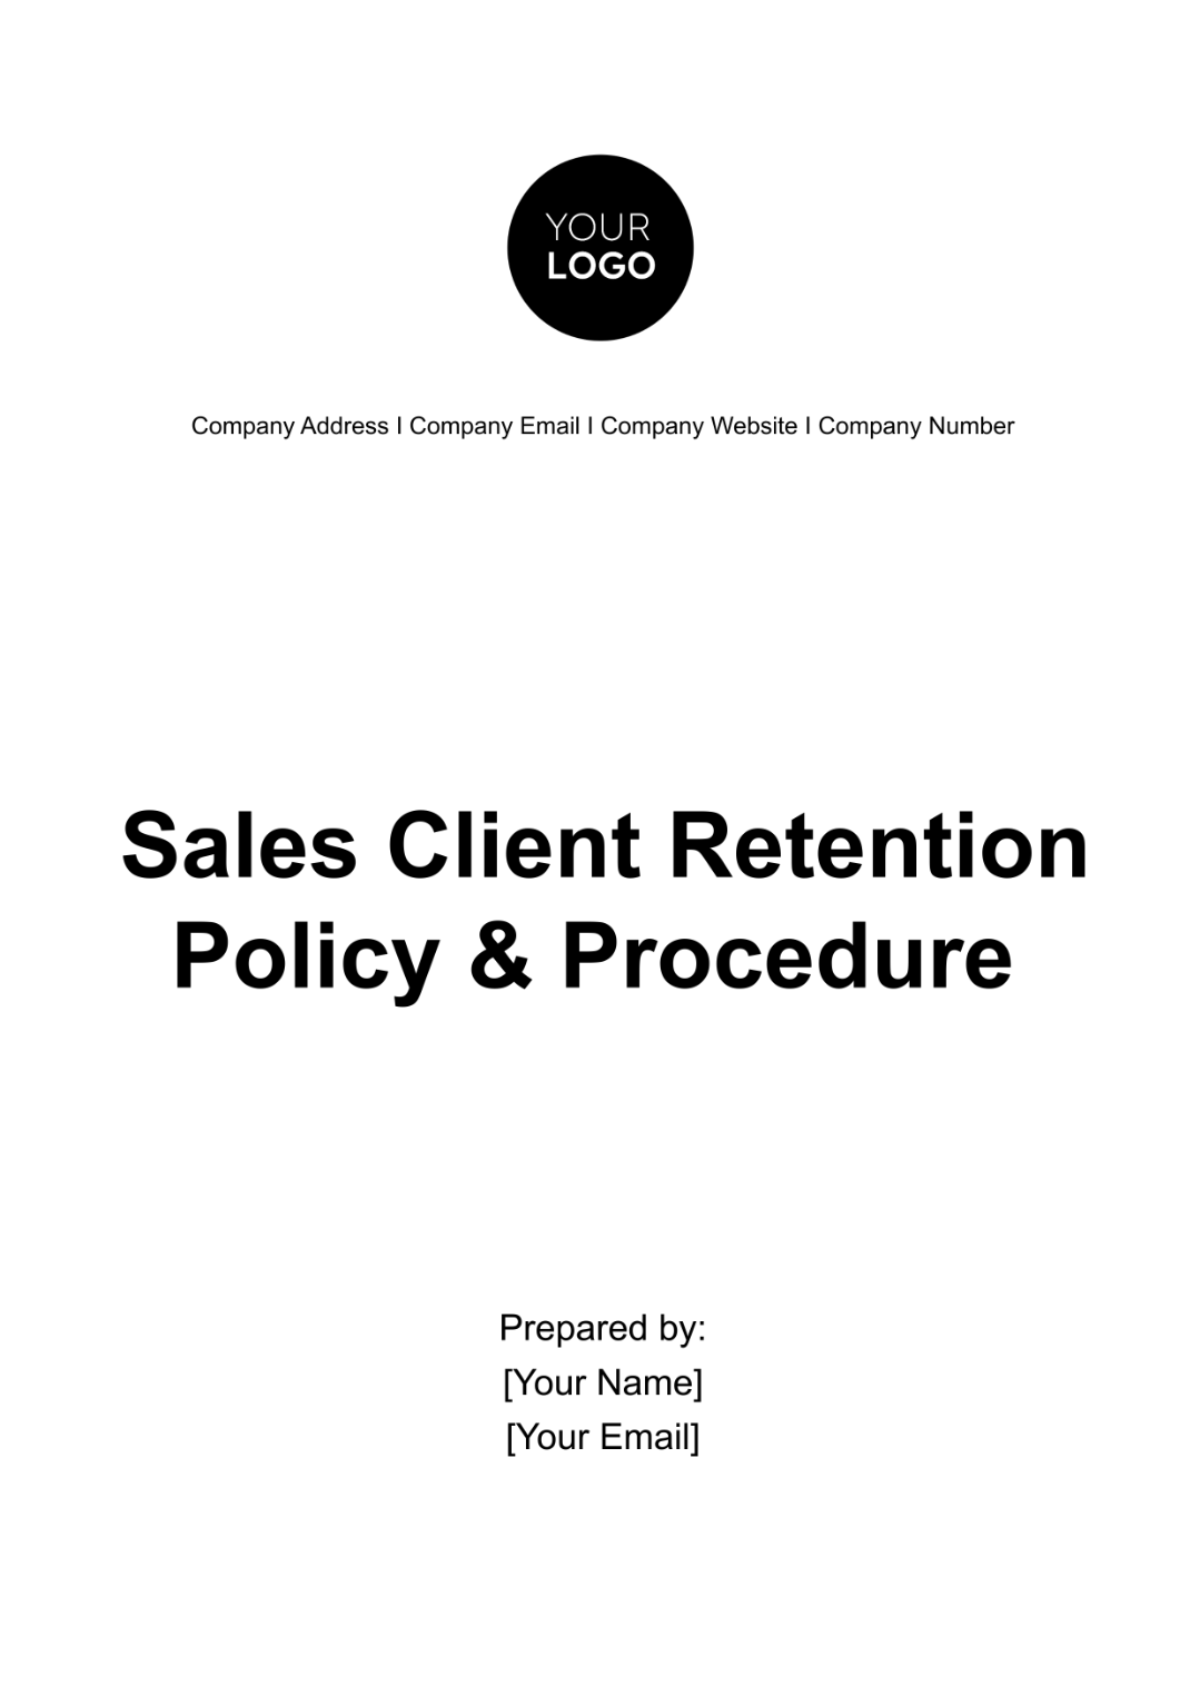 Free Sales Client Retention Policy & Procedure Template